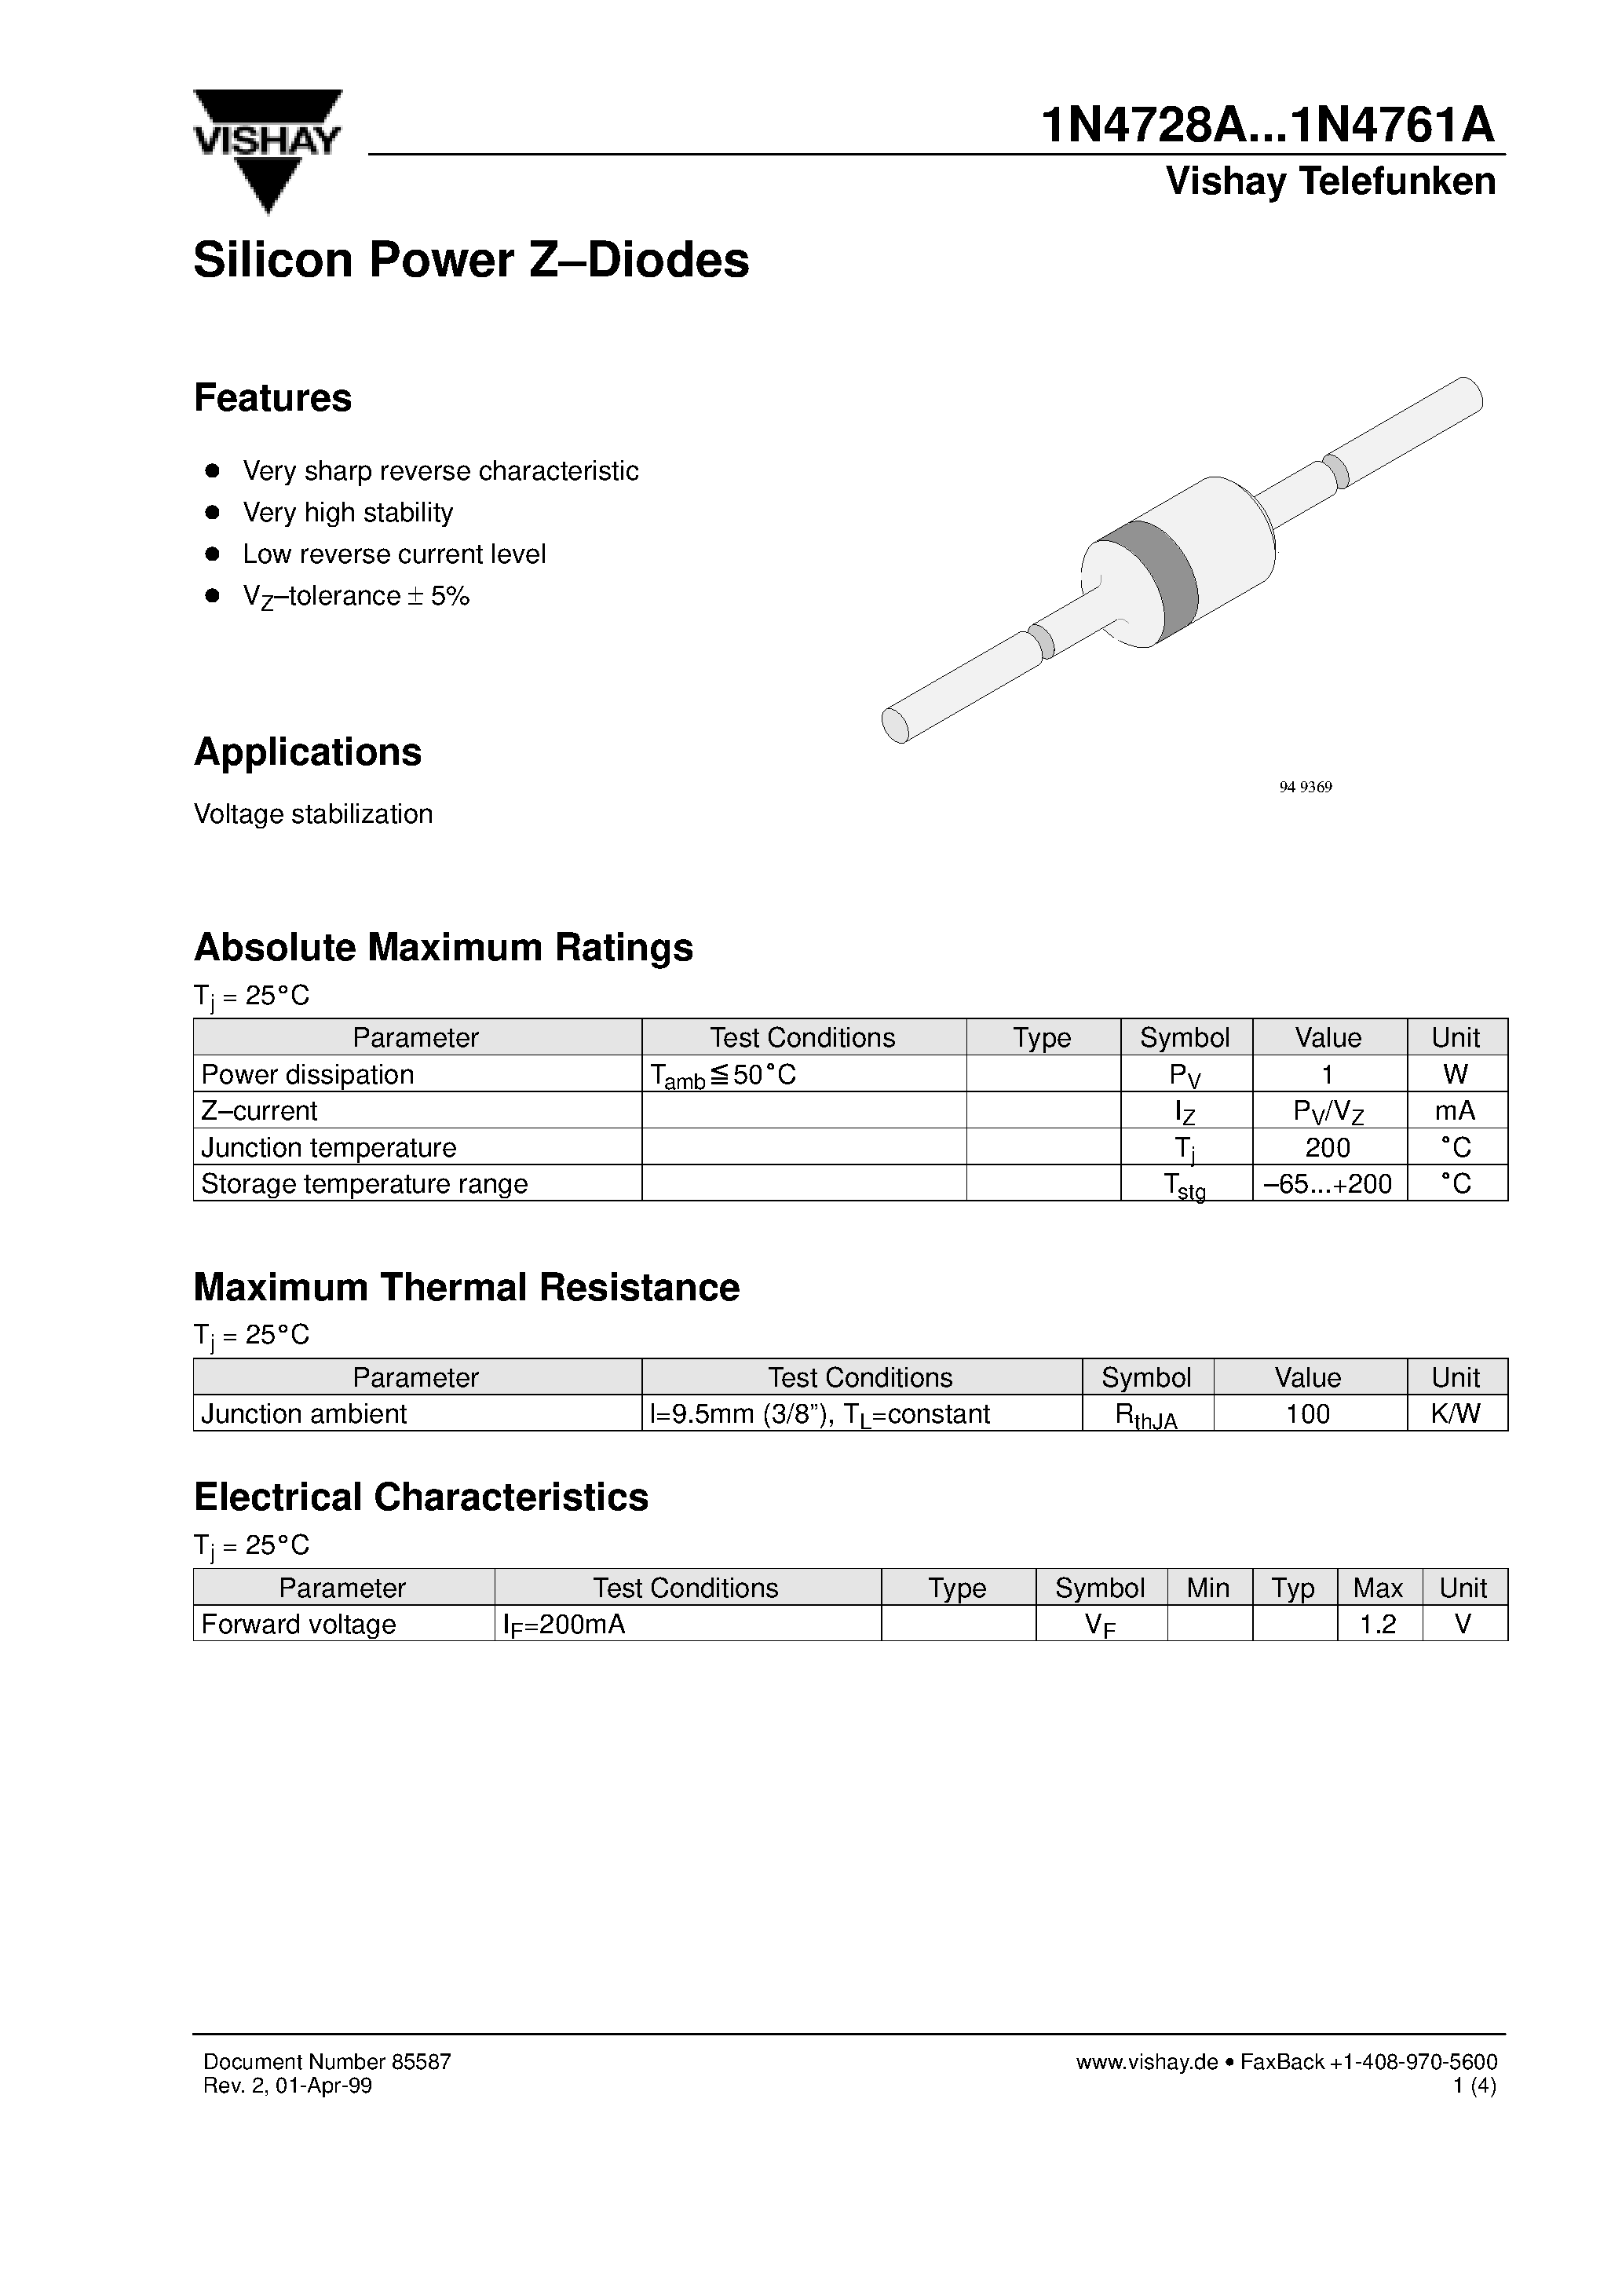 Datasheet 1N4758A - Silicon Power Z-Diodes page 1